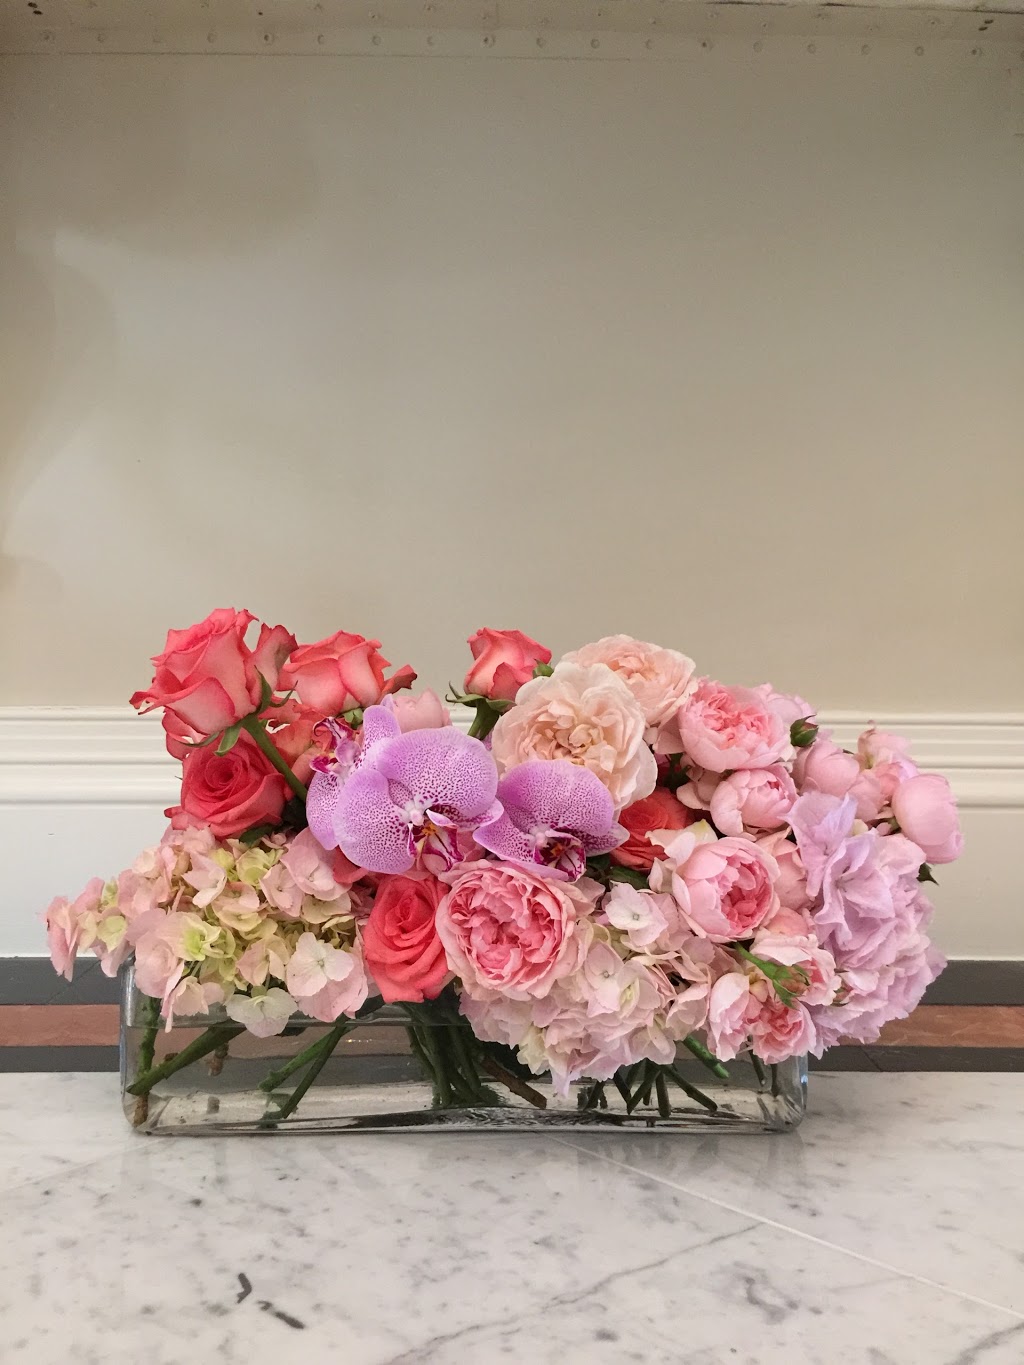 White House Flowers | 35 Pittwater Rd, Manly NSW 2095, Australia | Phone: (02) 9977 5323